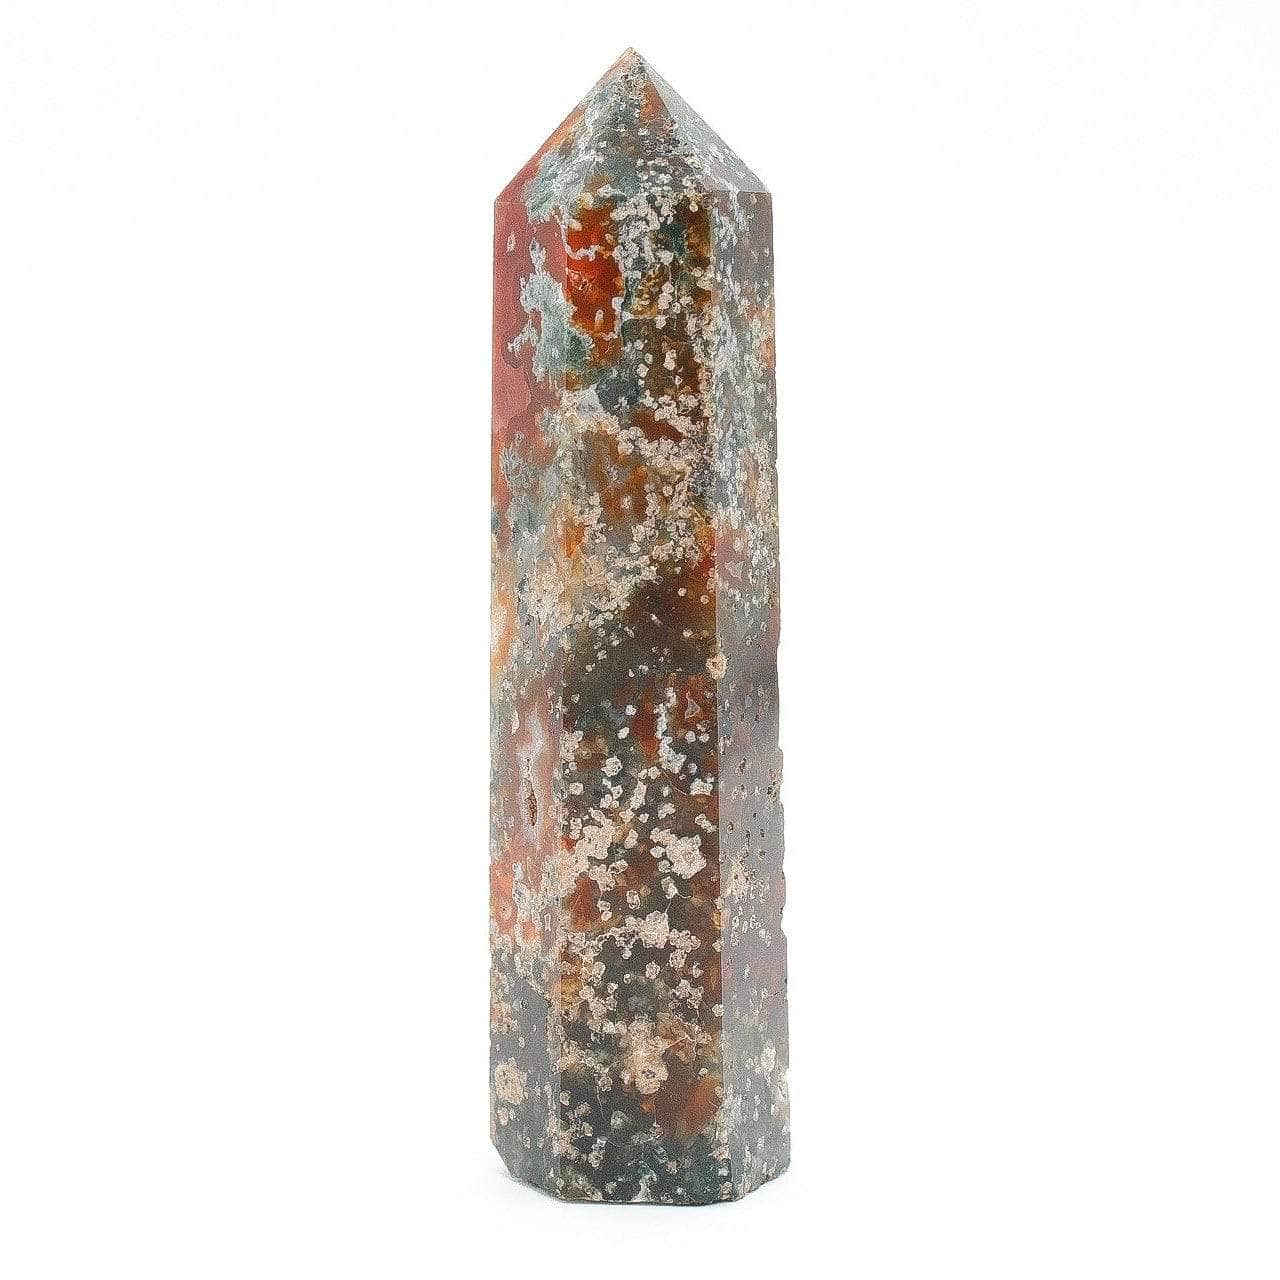 6-11 Crystals Crystal Red Moss Agate Tower (ma-01) 1.75" x 6.5"